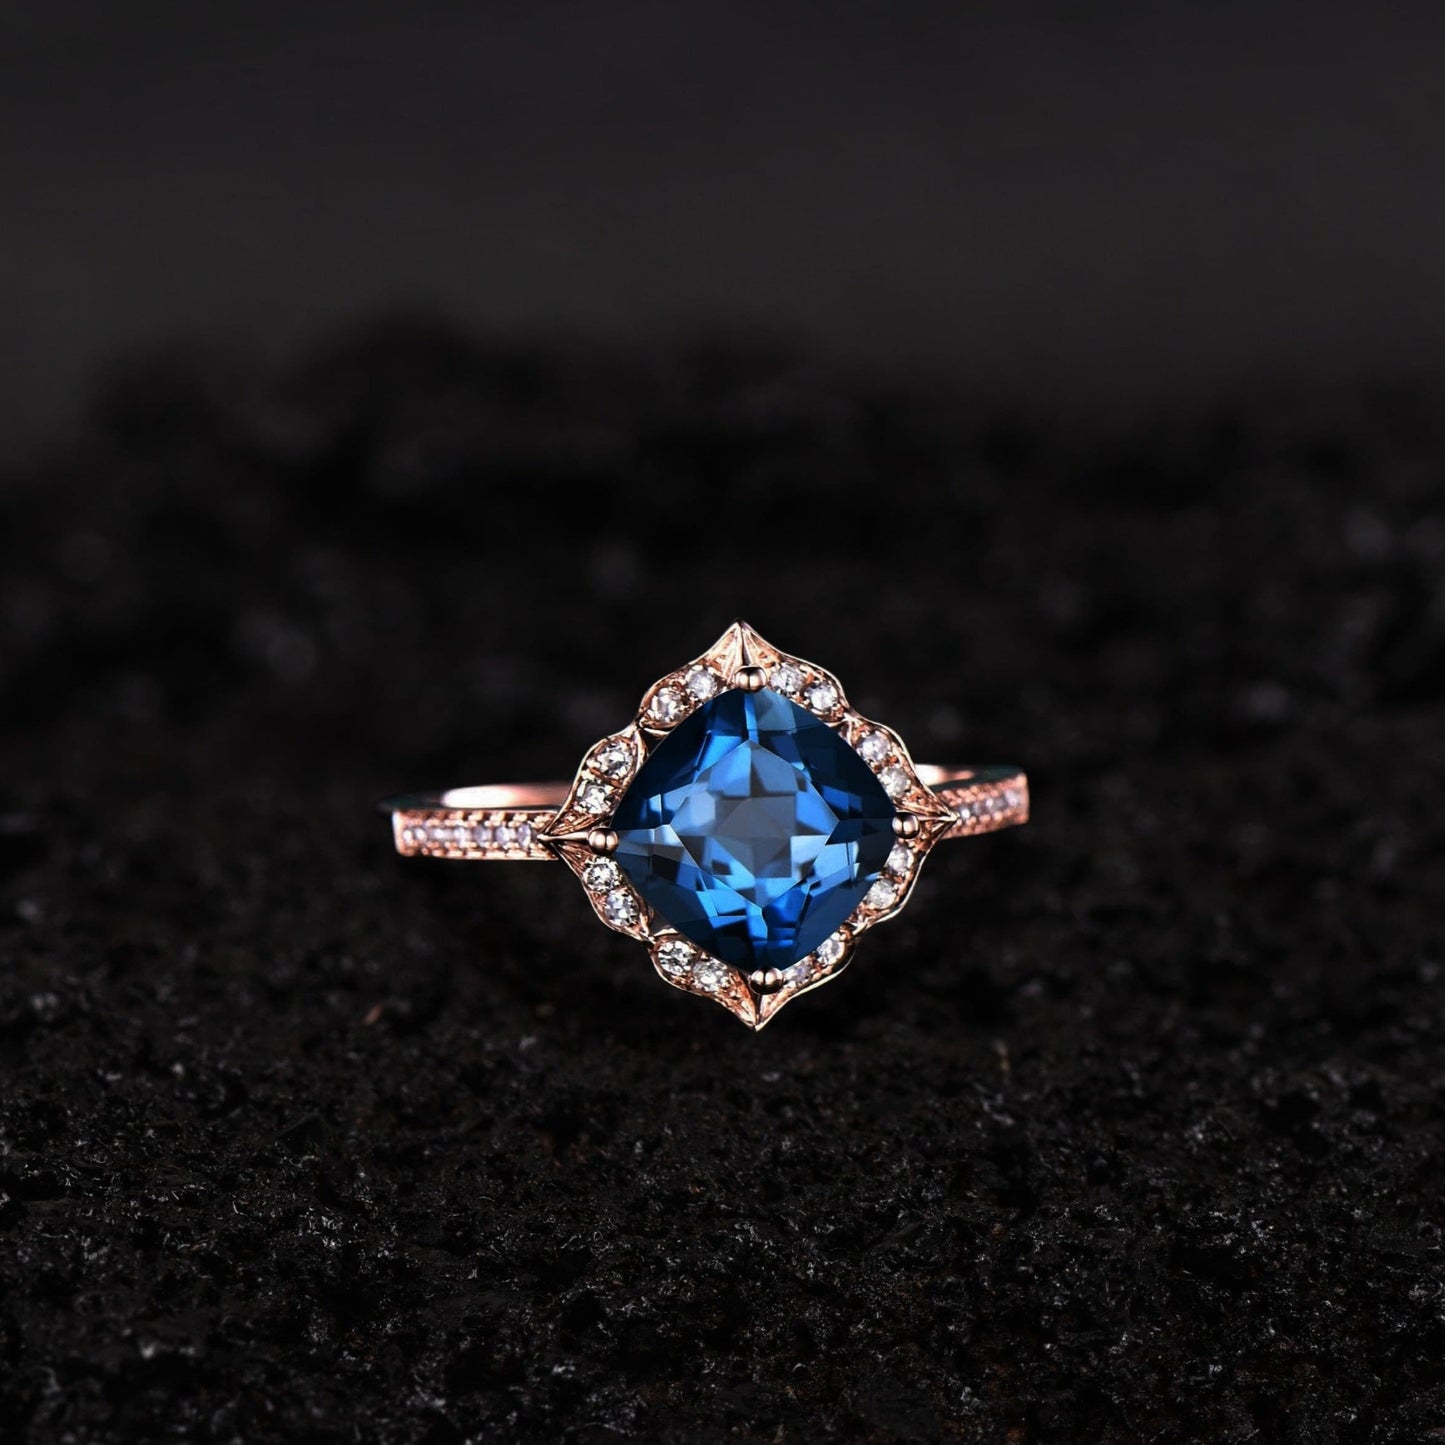 Cushion Cut Sapphire Cluster Ring September Birthstone Ring